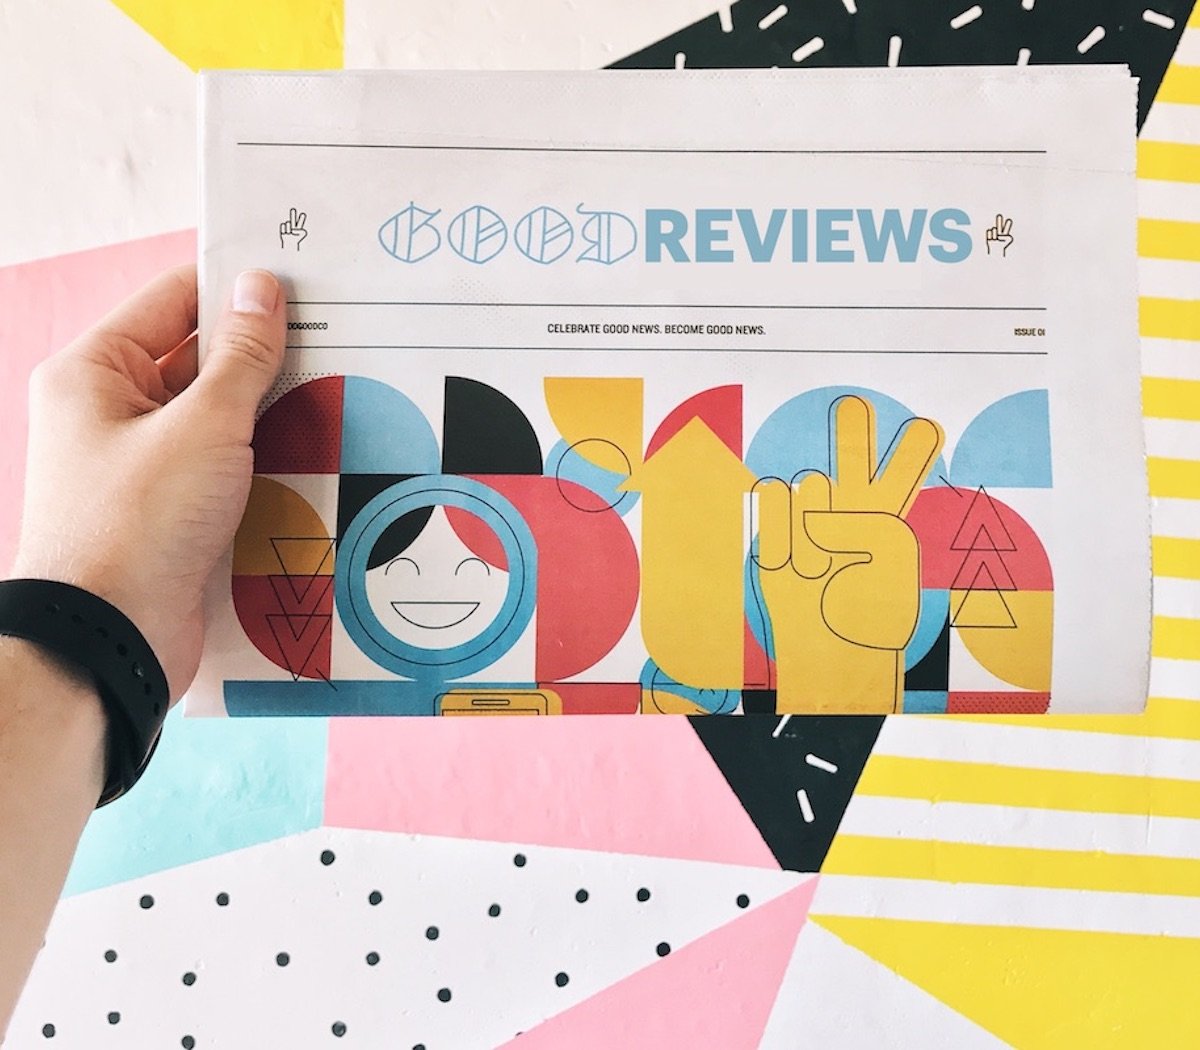 The Anatomy of a Good Review: 10 Examples from Real Customer Reviews